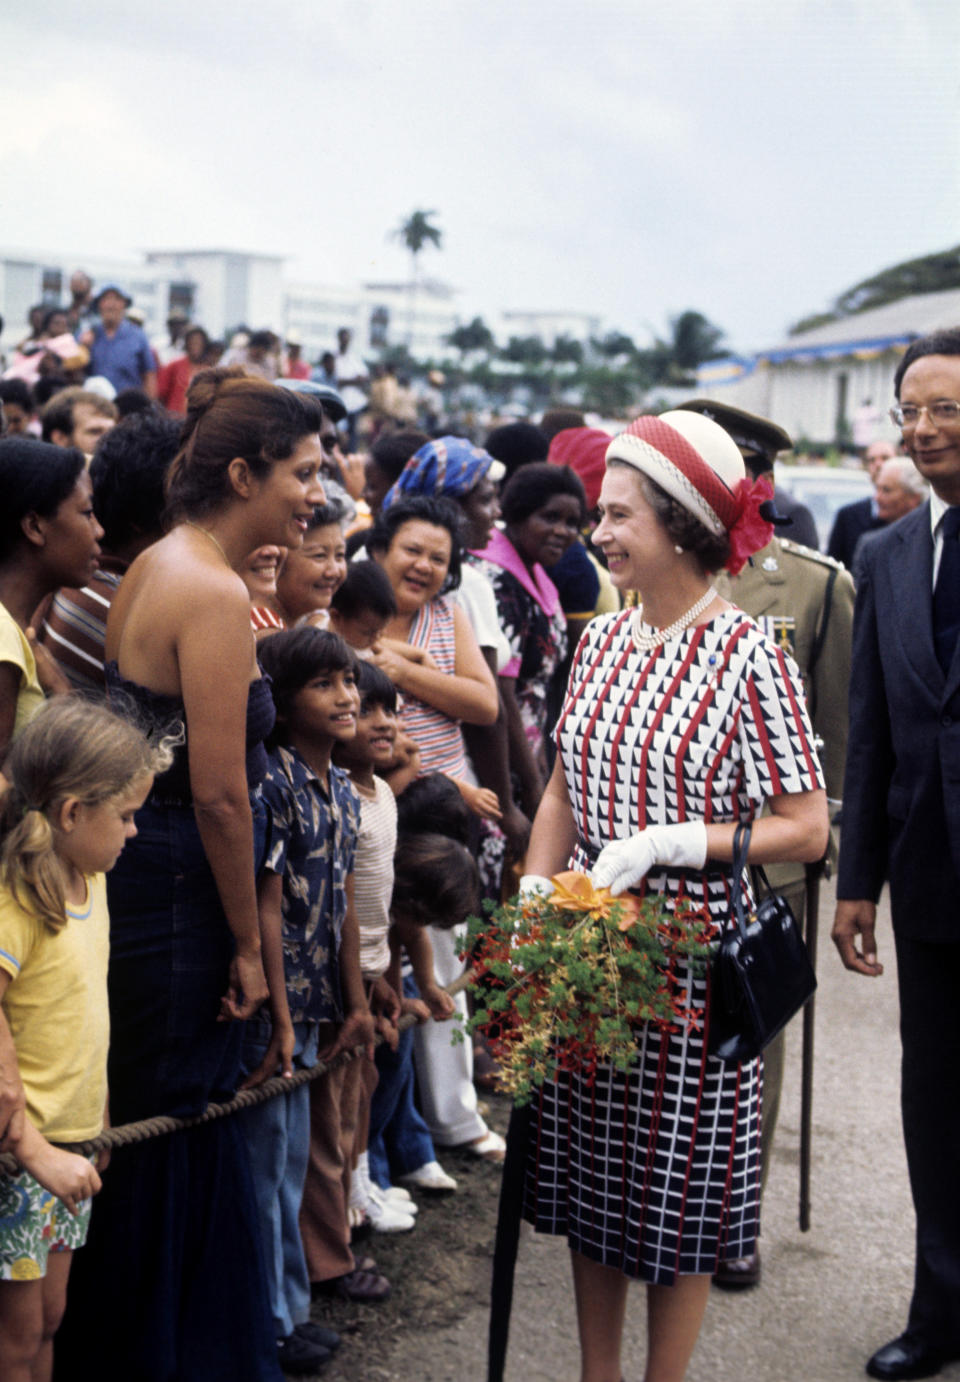 Queen Elizabeth II on a walkabout in Bridgetown, Barbados, during her Silver Jubilee tour of the Caribbean.